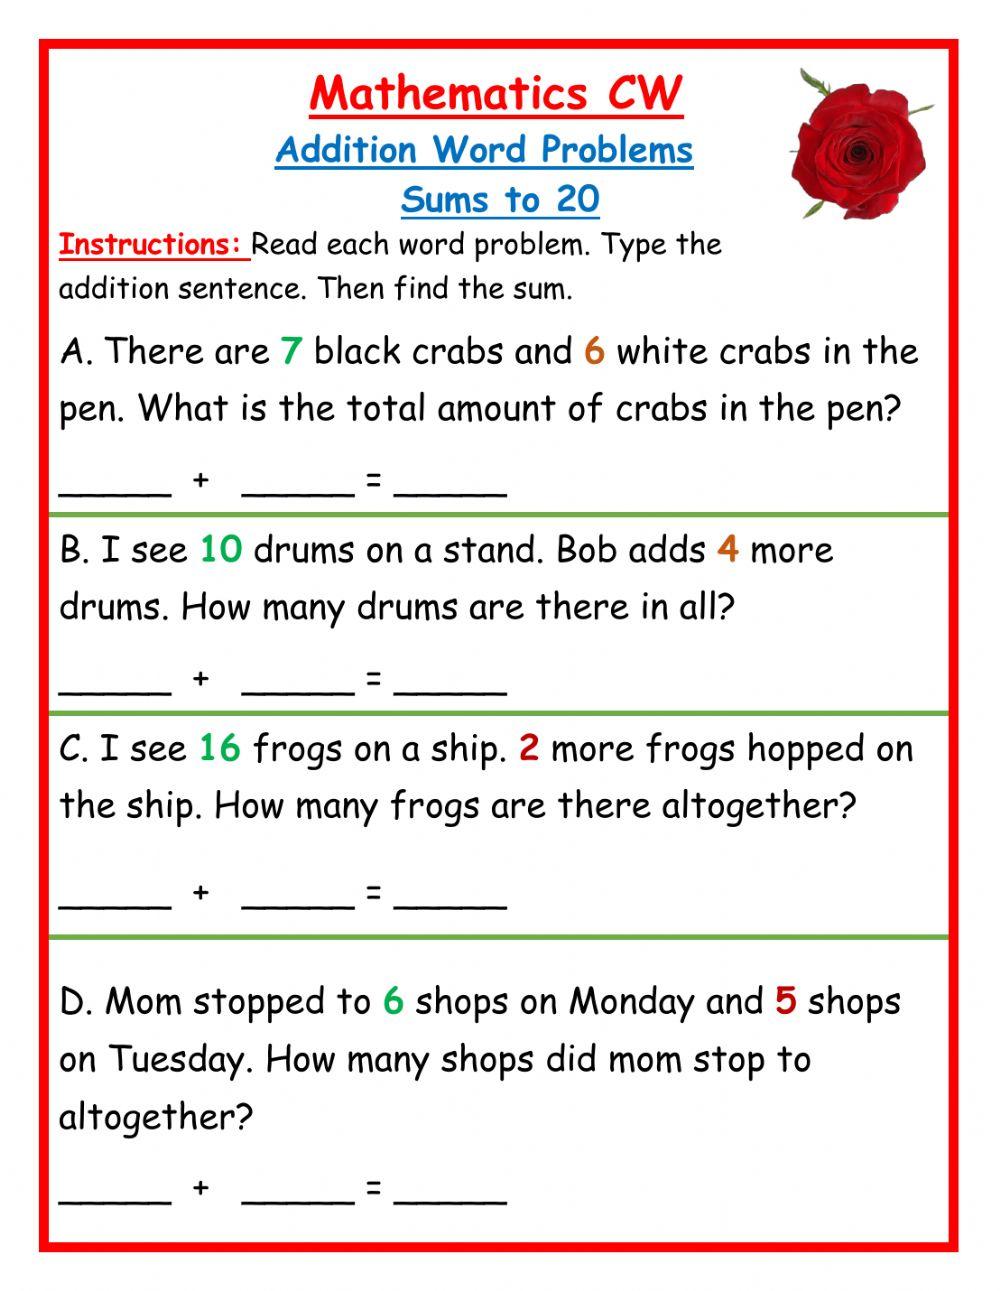 Addition Word Problems sums to 20 CW